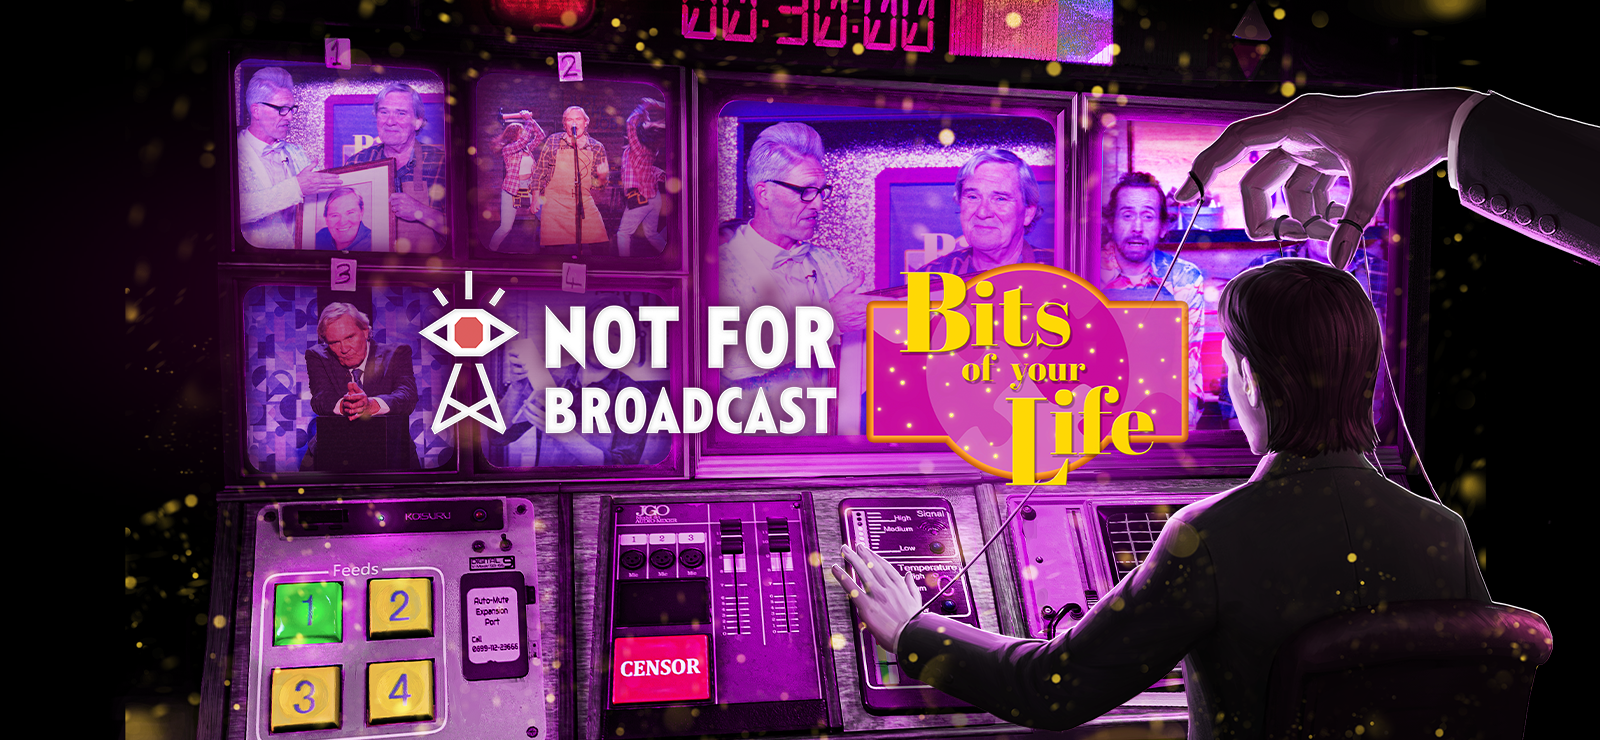 Not For Broadcast: Bits Of Your Life